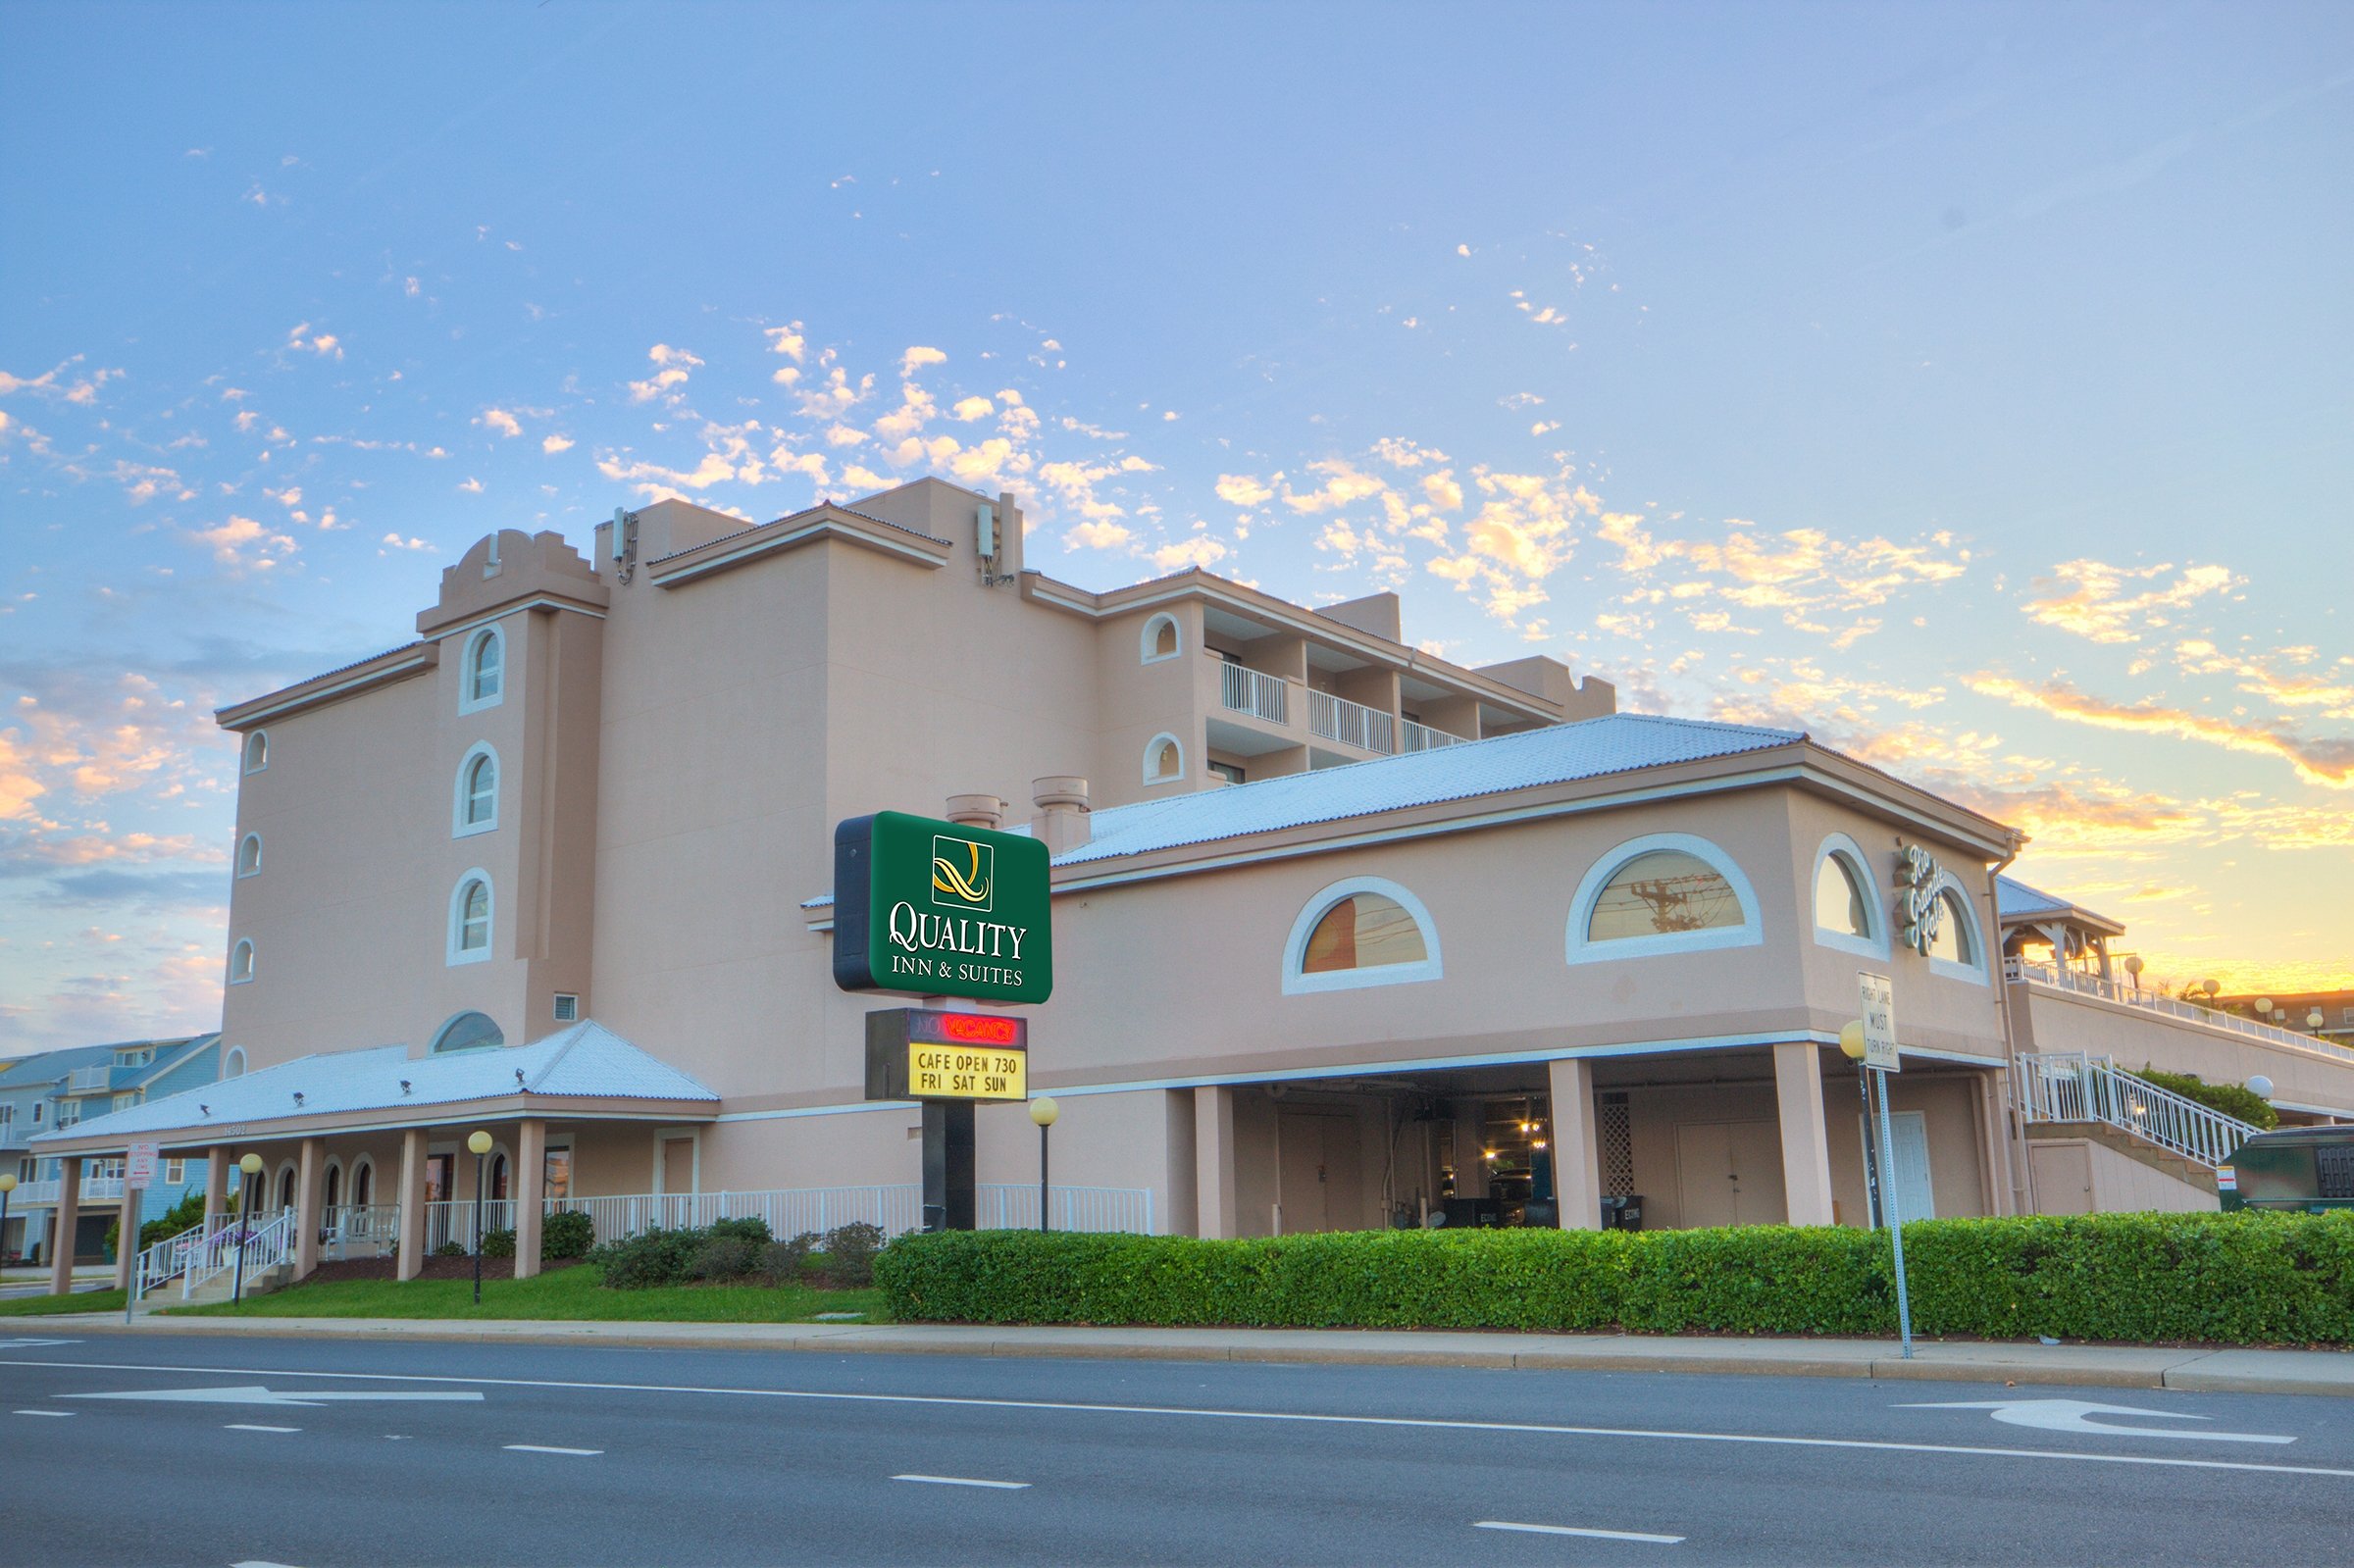 Welcome to the Quality Inn OC North!